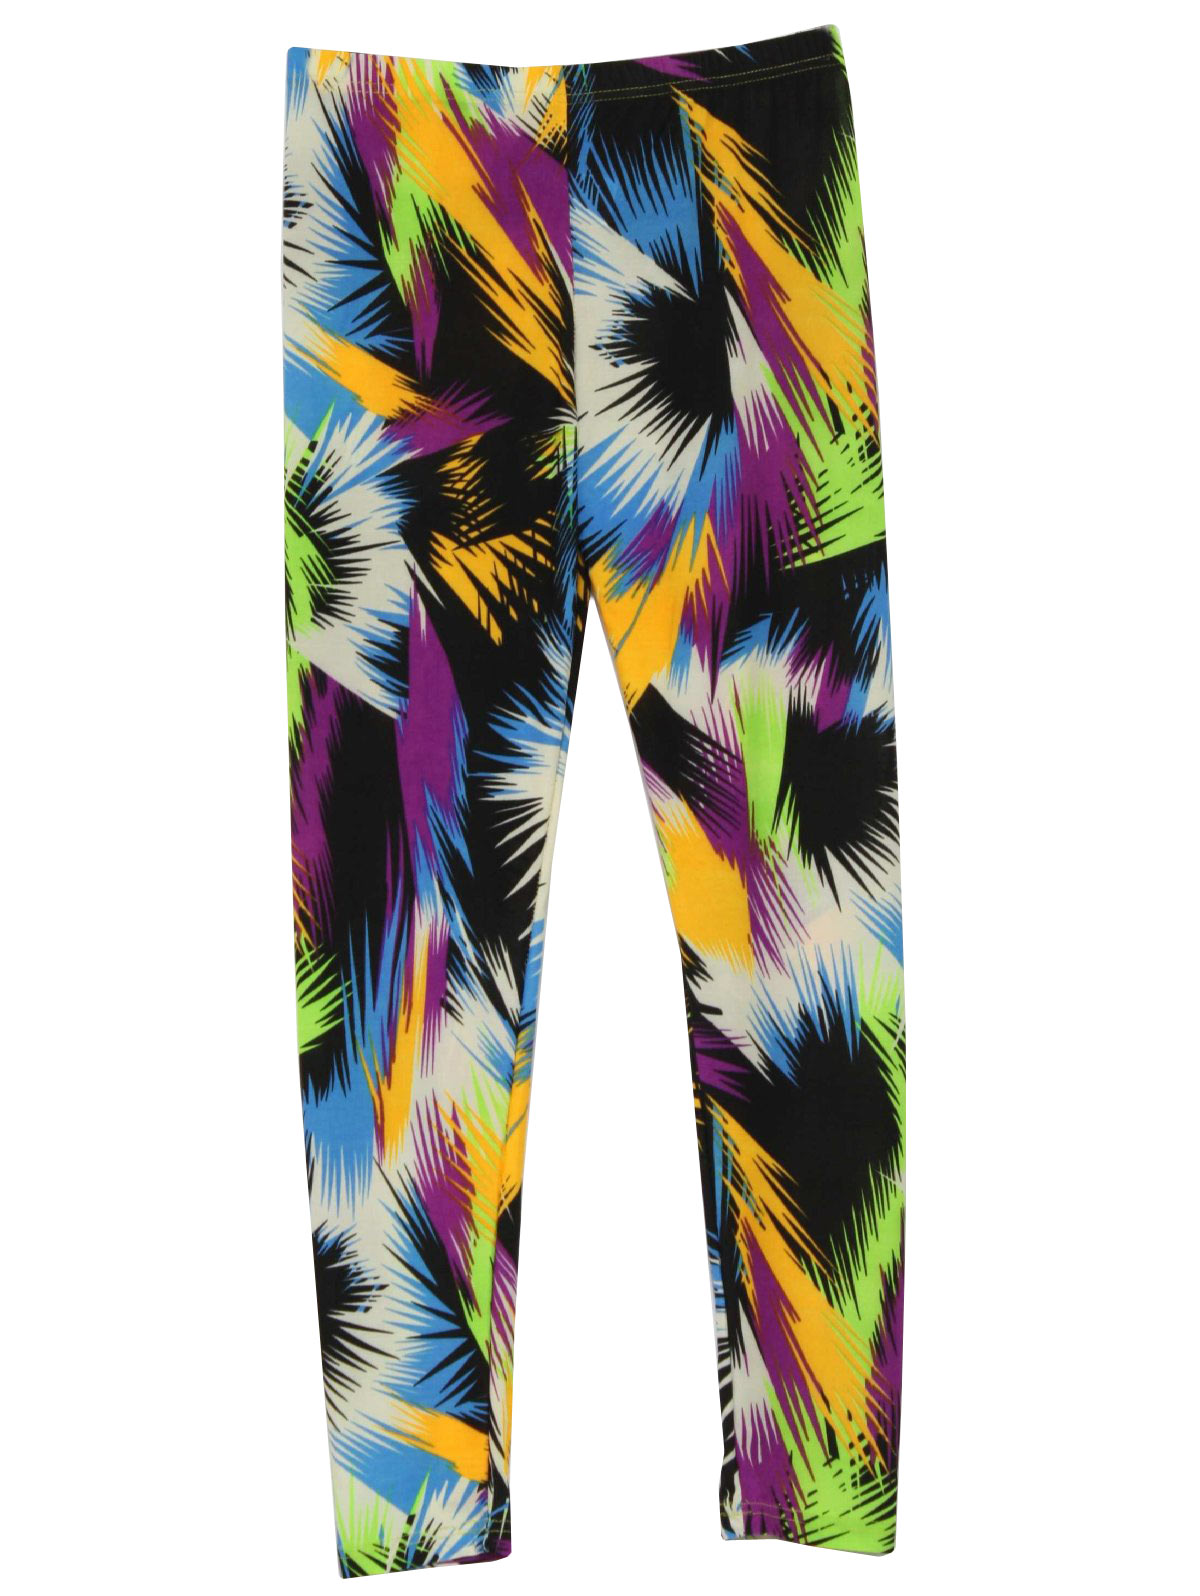 New Wave Glam Rock Totally 80s Look Skinny Legging Style Pants to